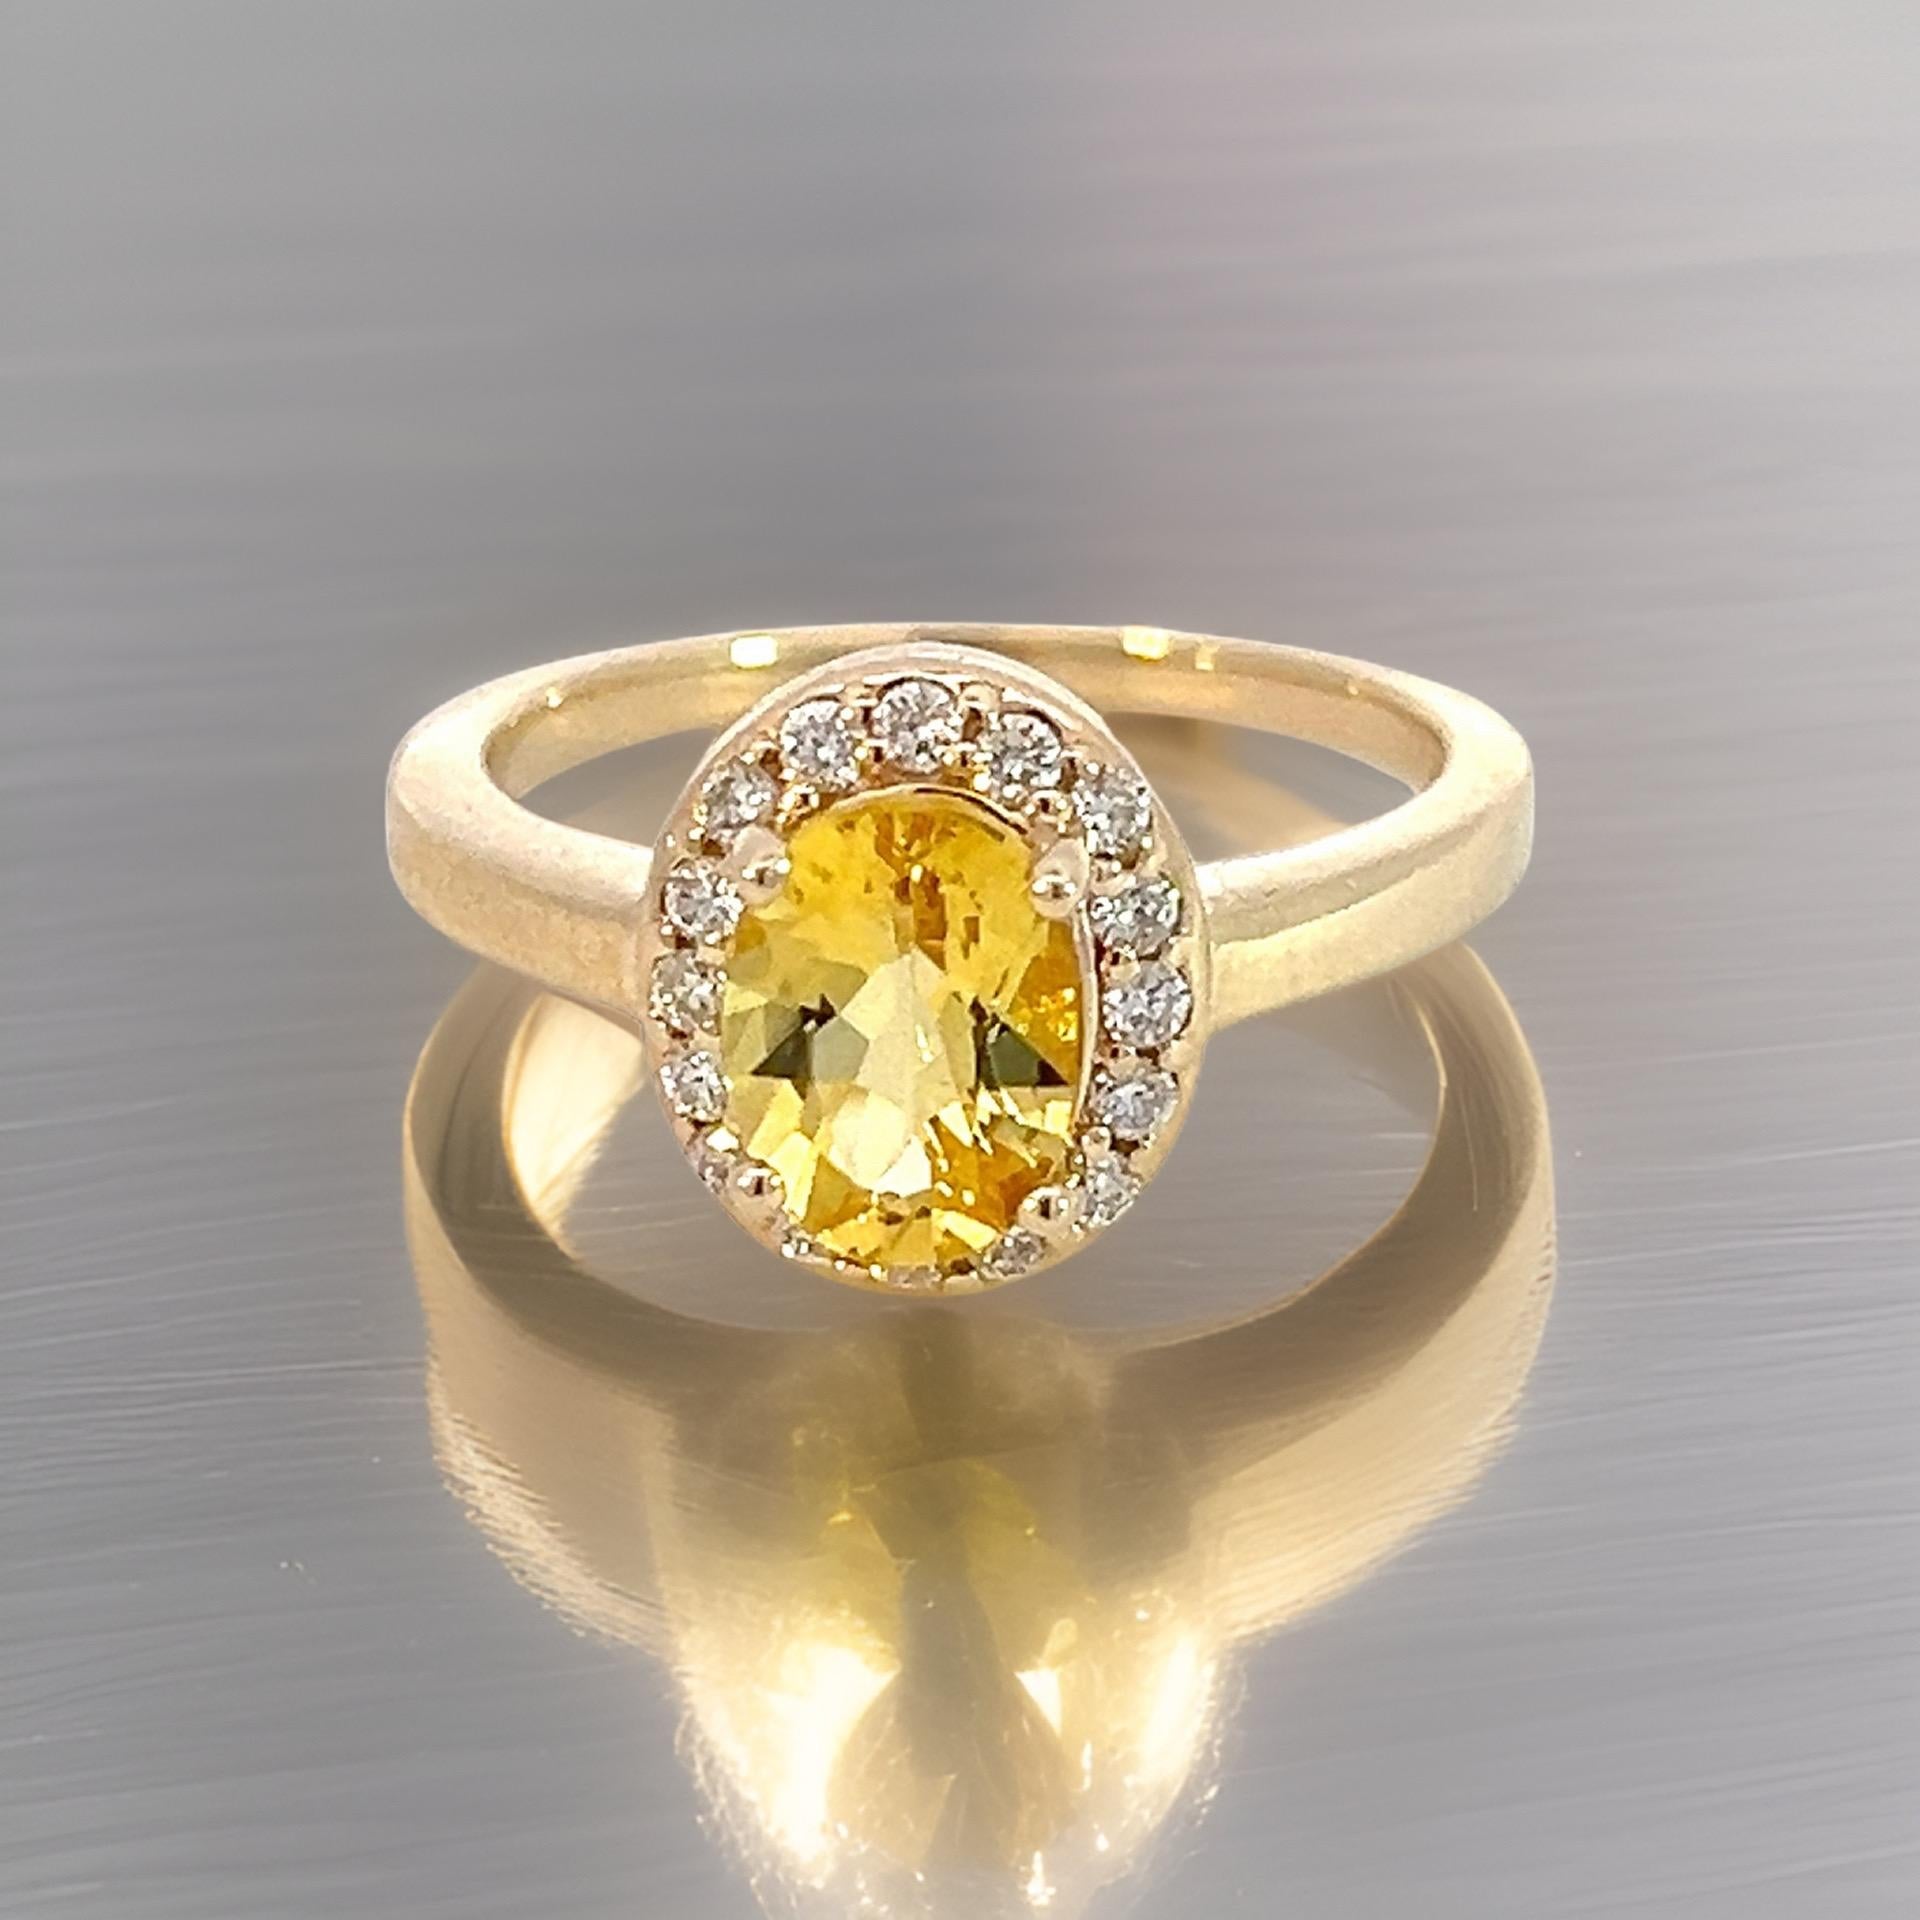 Natural Citrine Diamond Ring 6.5 14k Yellow Gold 1.74 TCW Certified For Sale 7